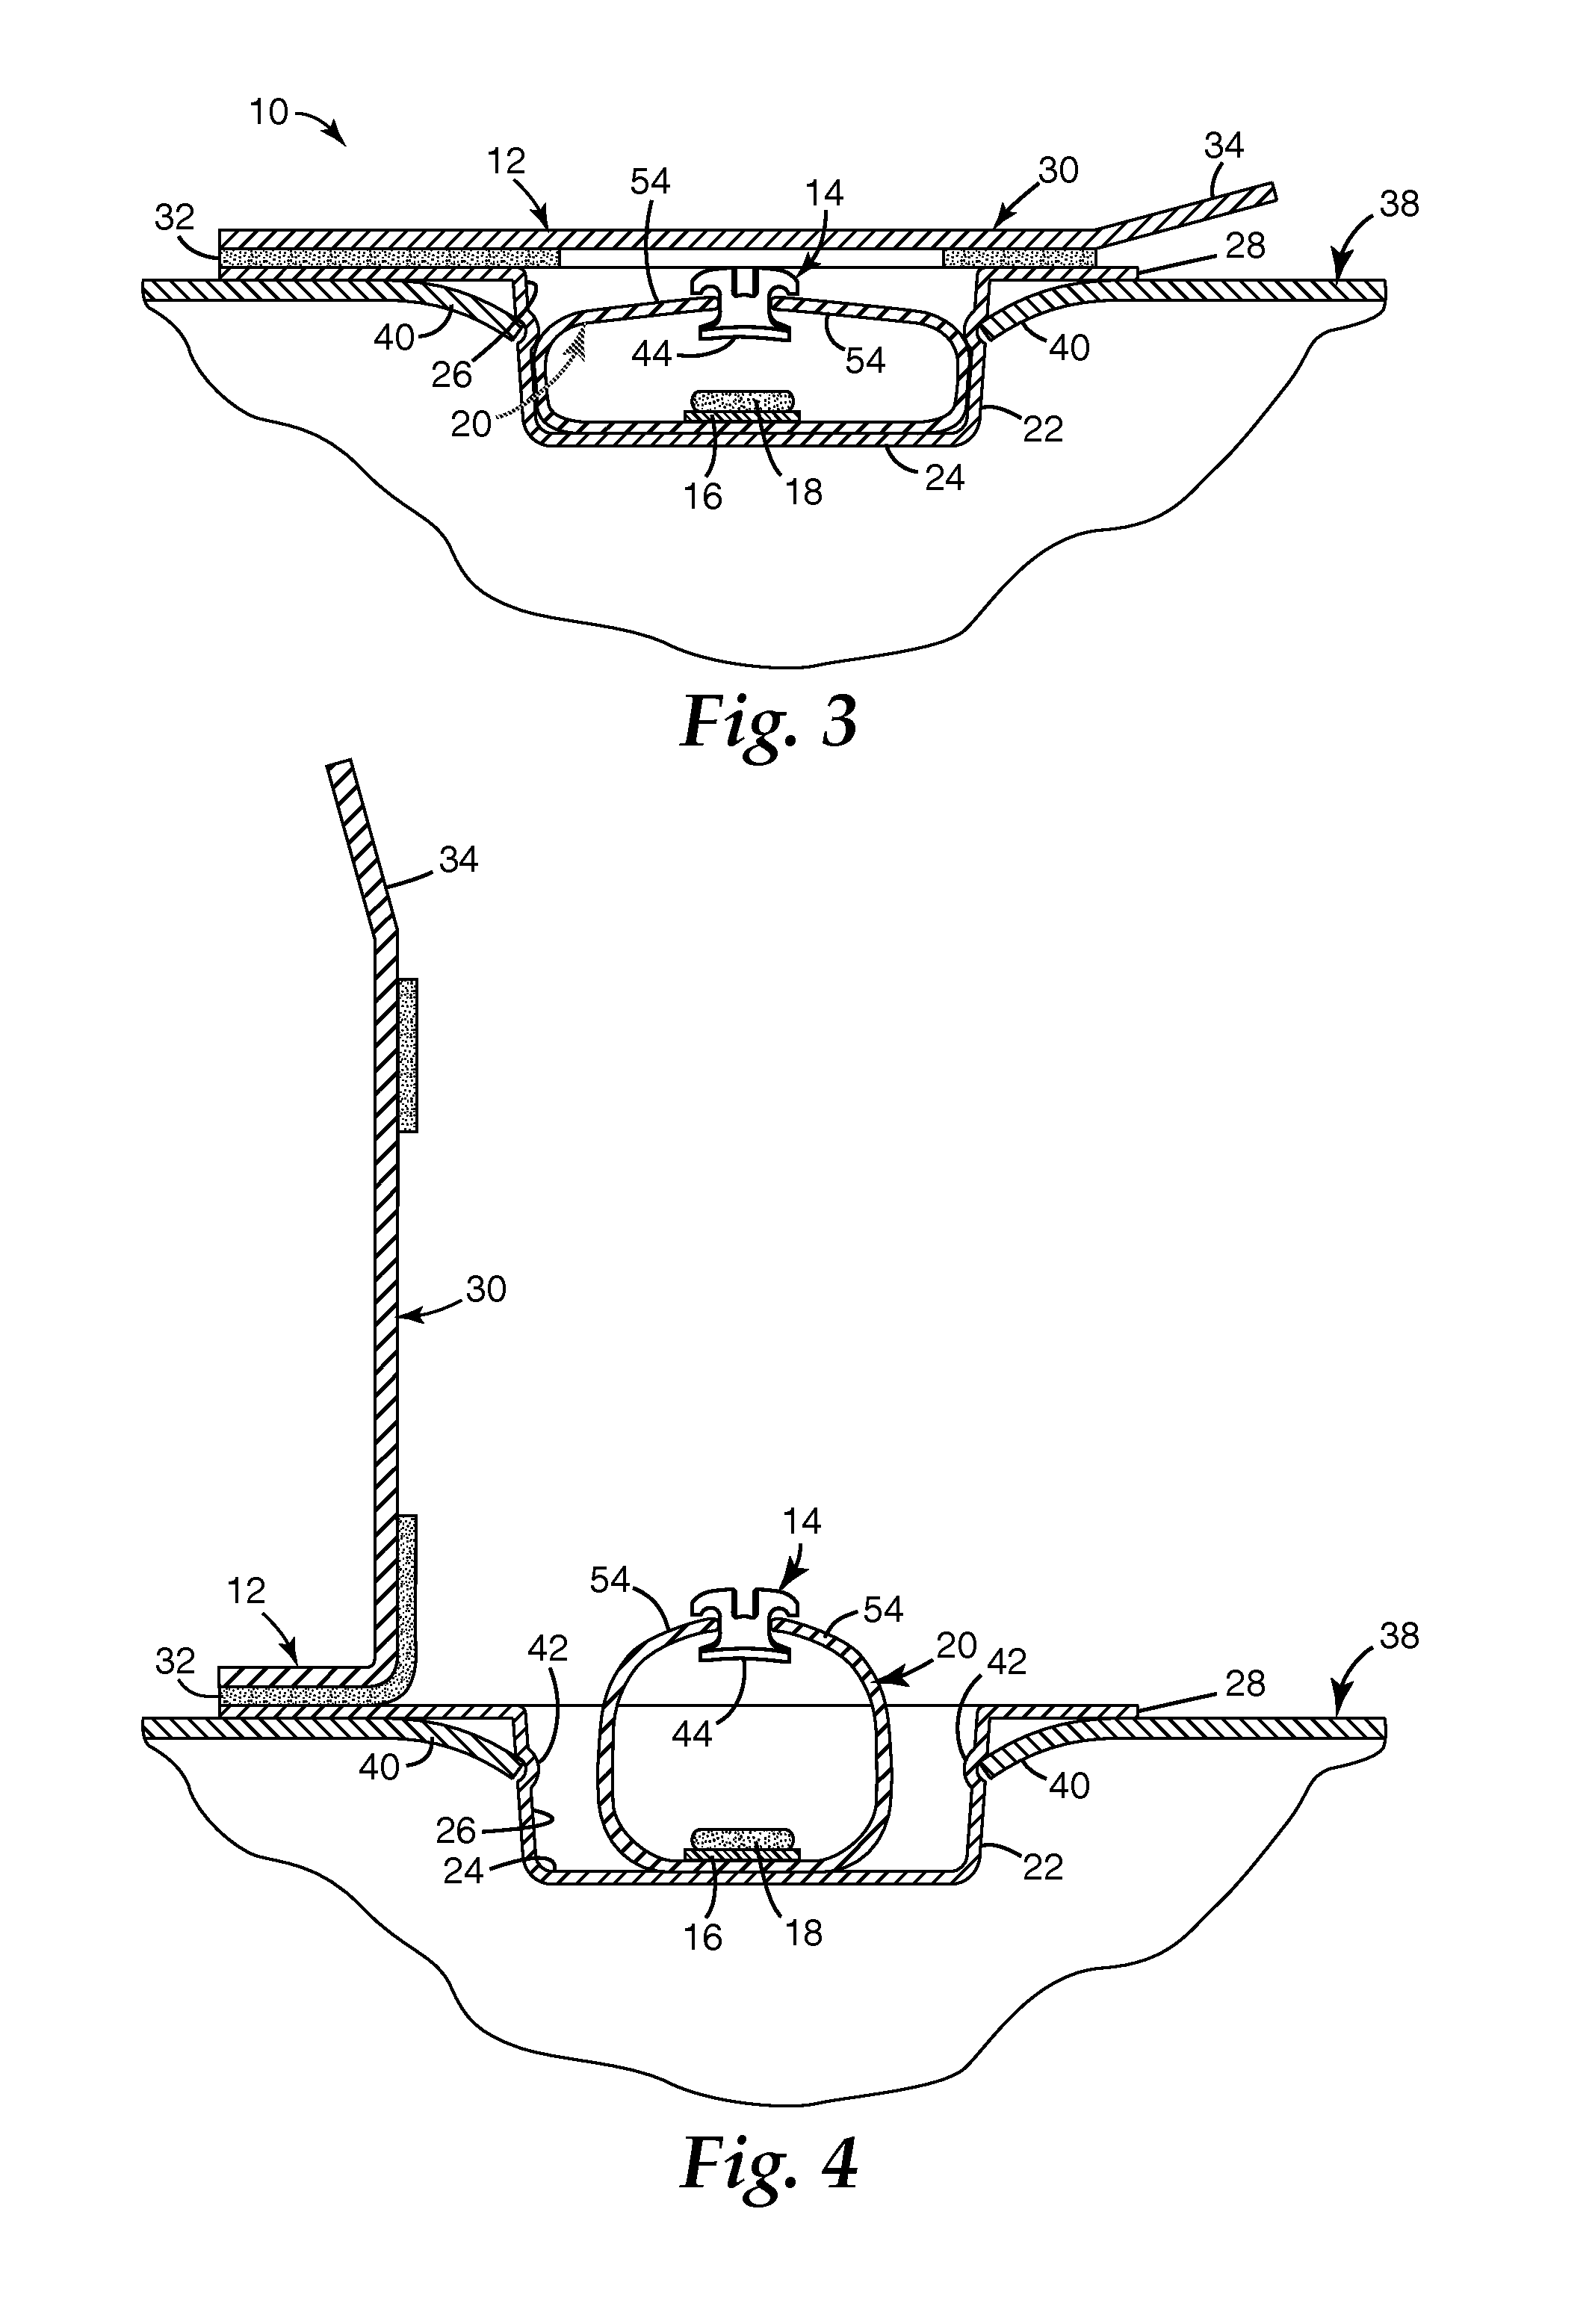 Packaged orthodontic appliance with user-applied adhesive